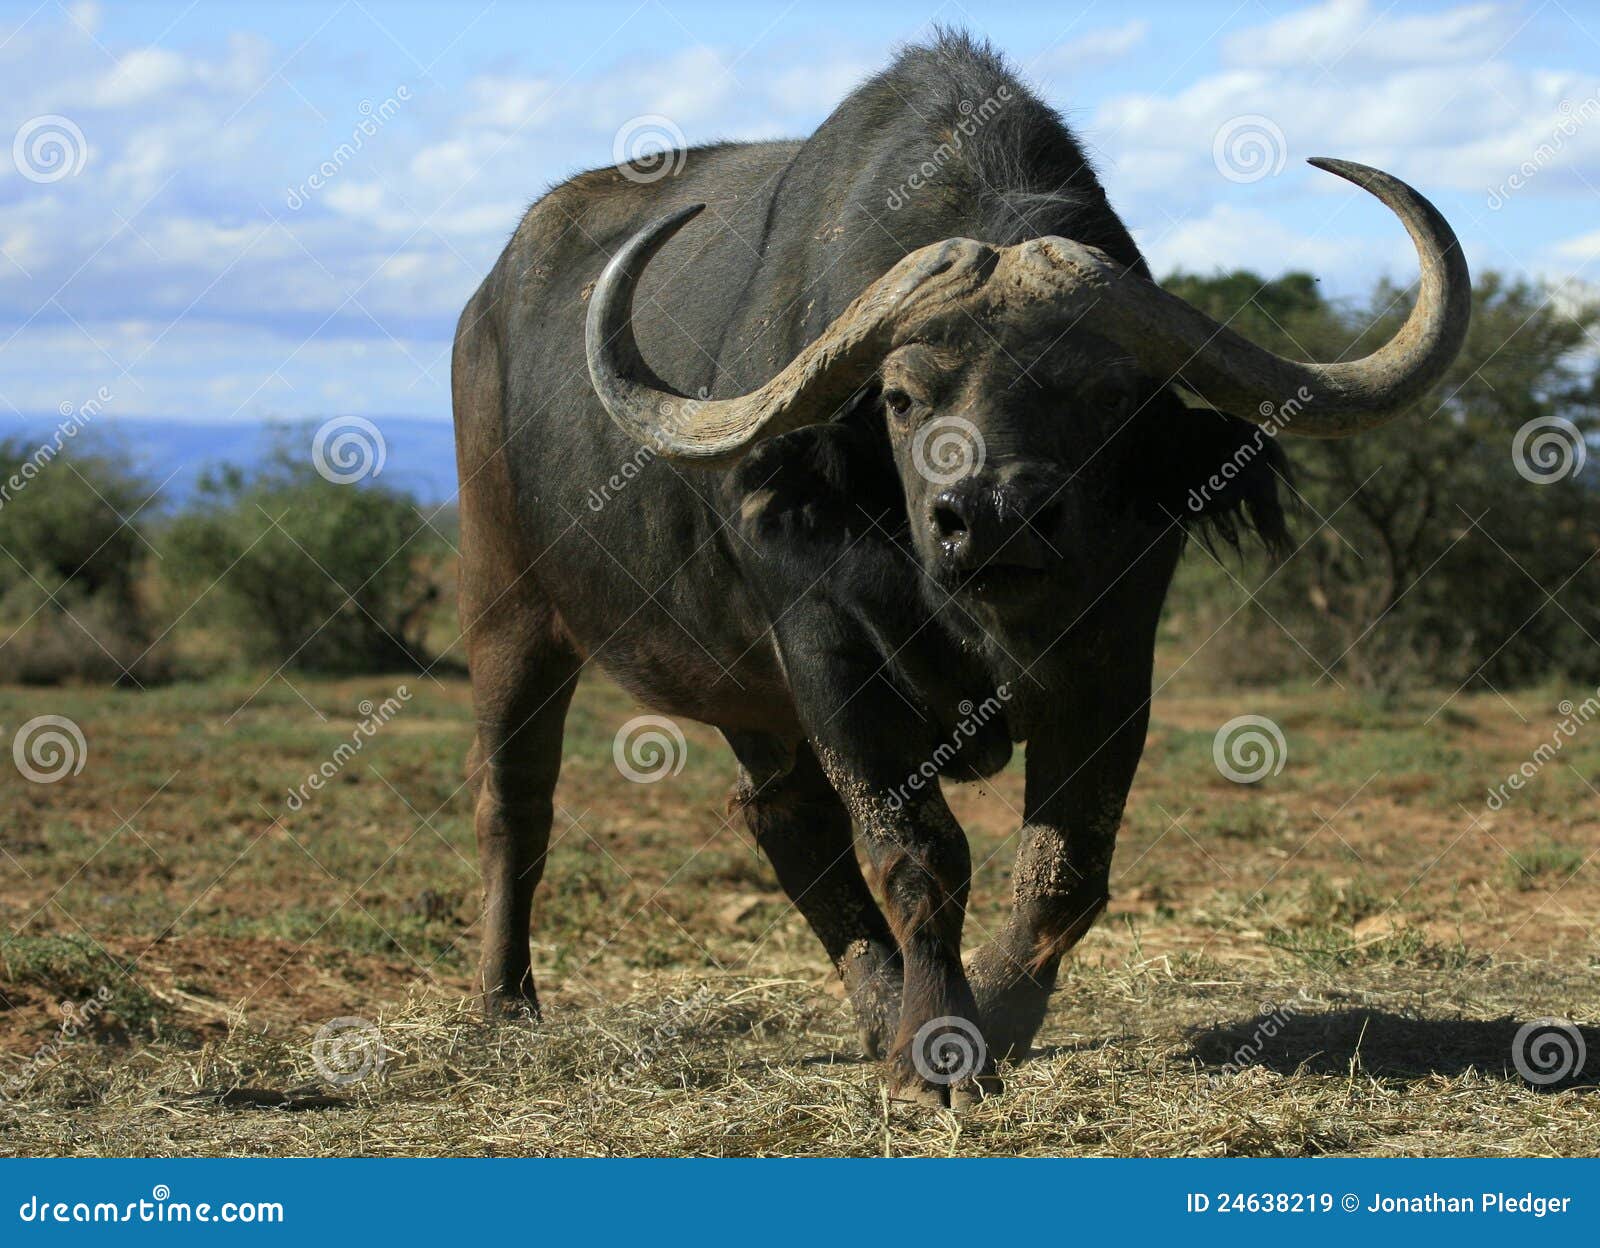 cape buffalo in south africa